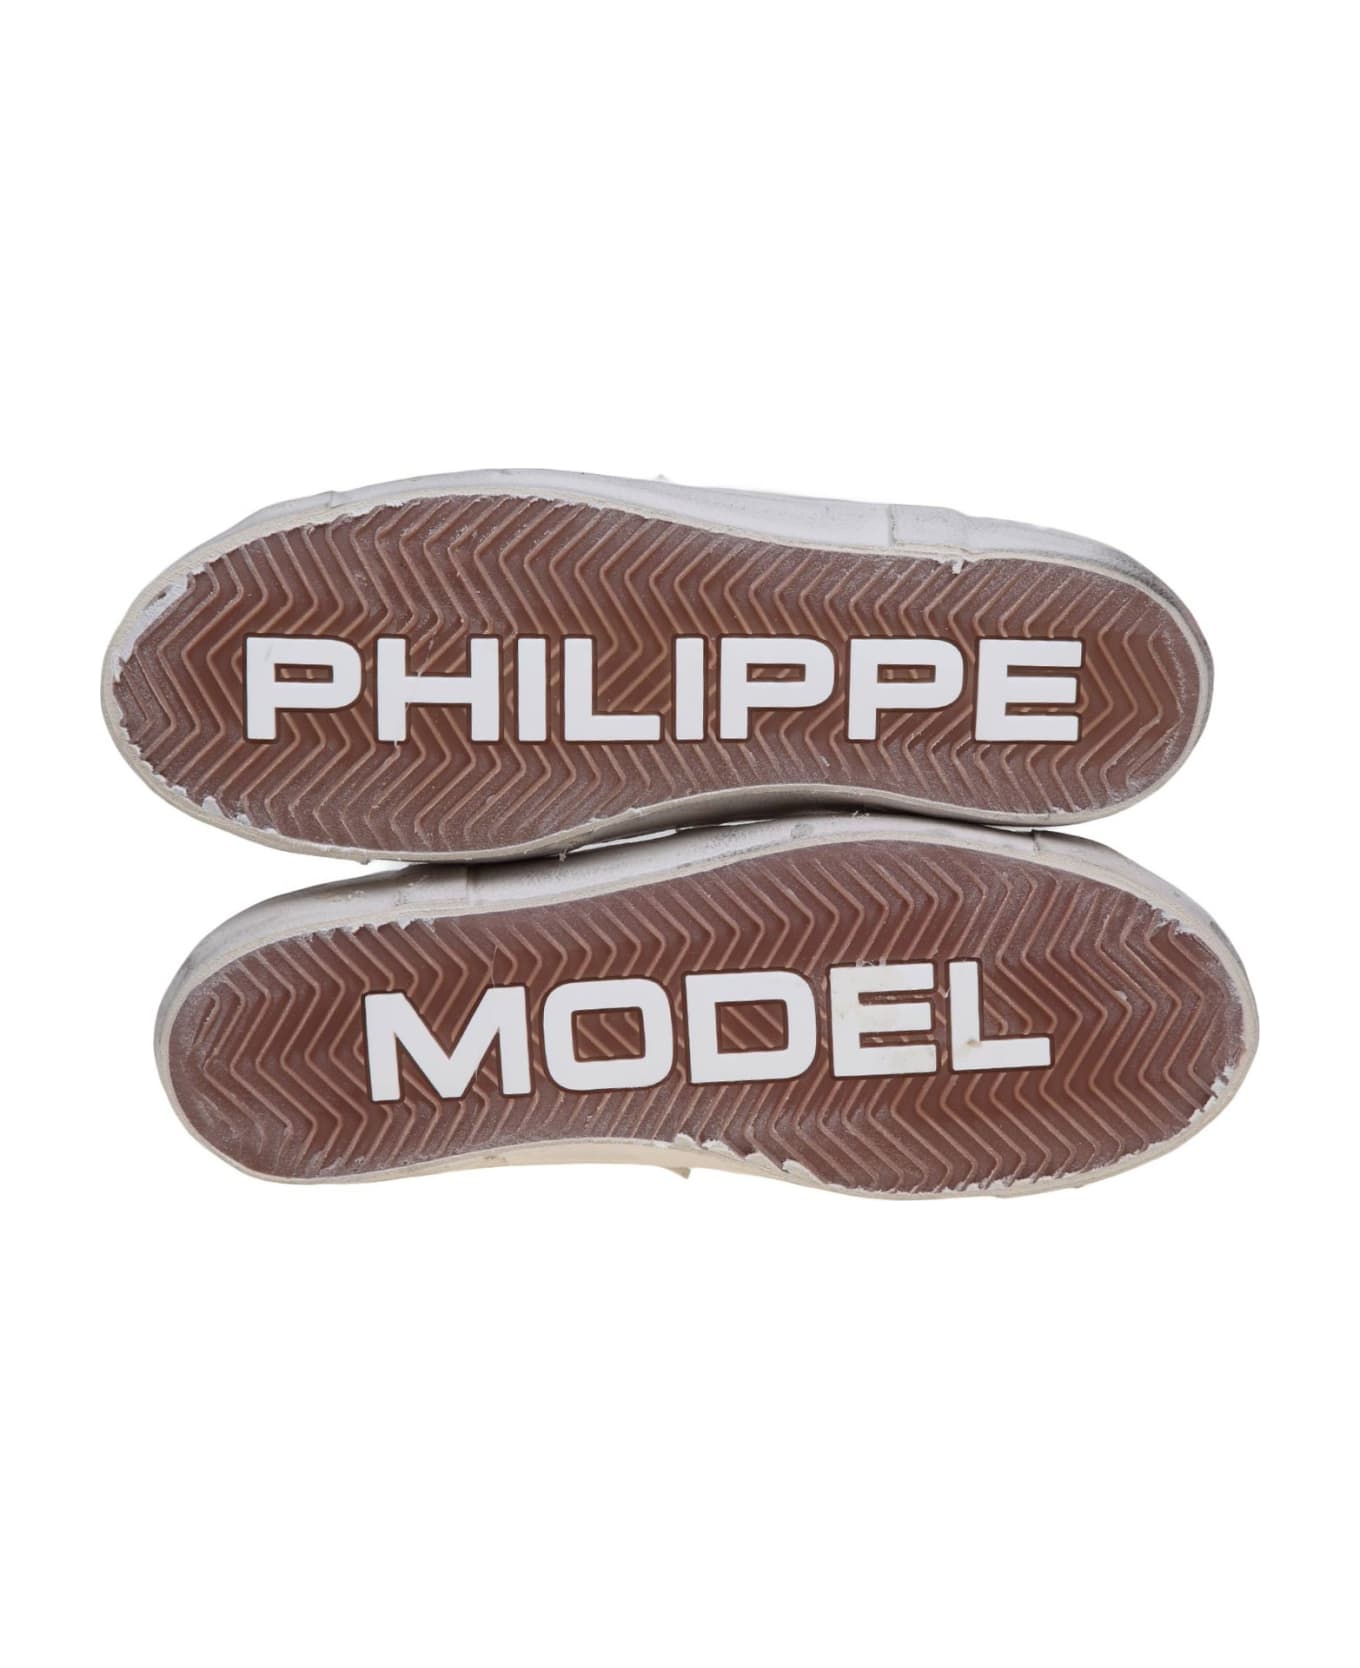 Philippe Model Prsx Low Sneakers In White Leather And Suede - Bianco